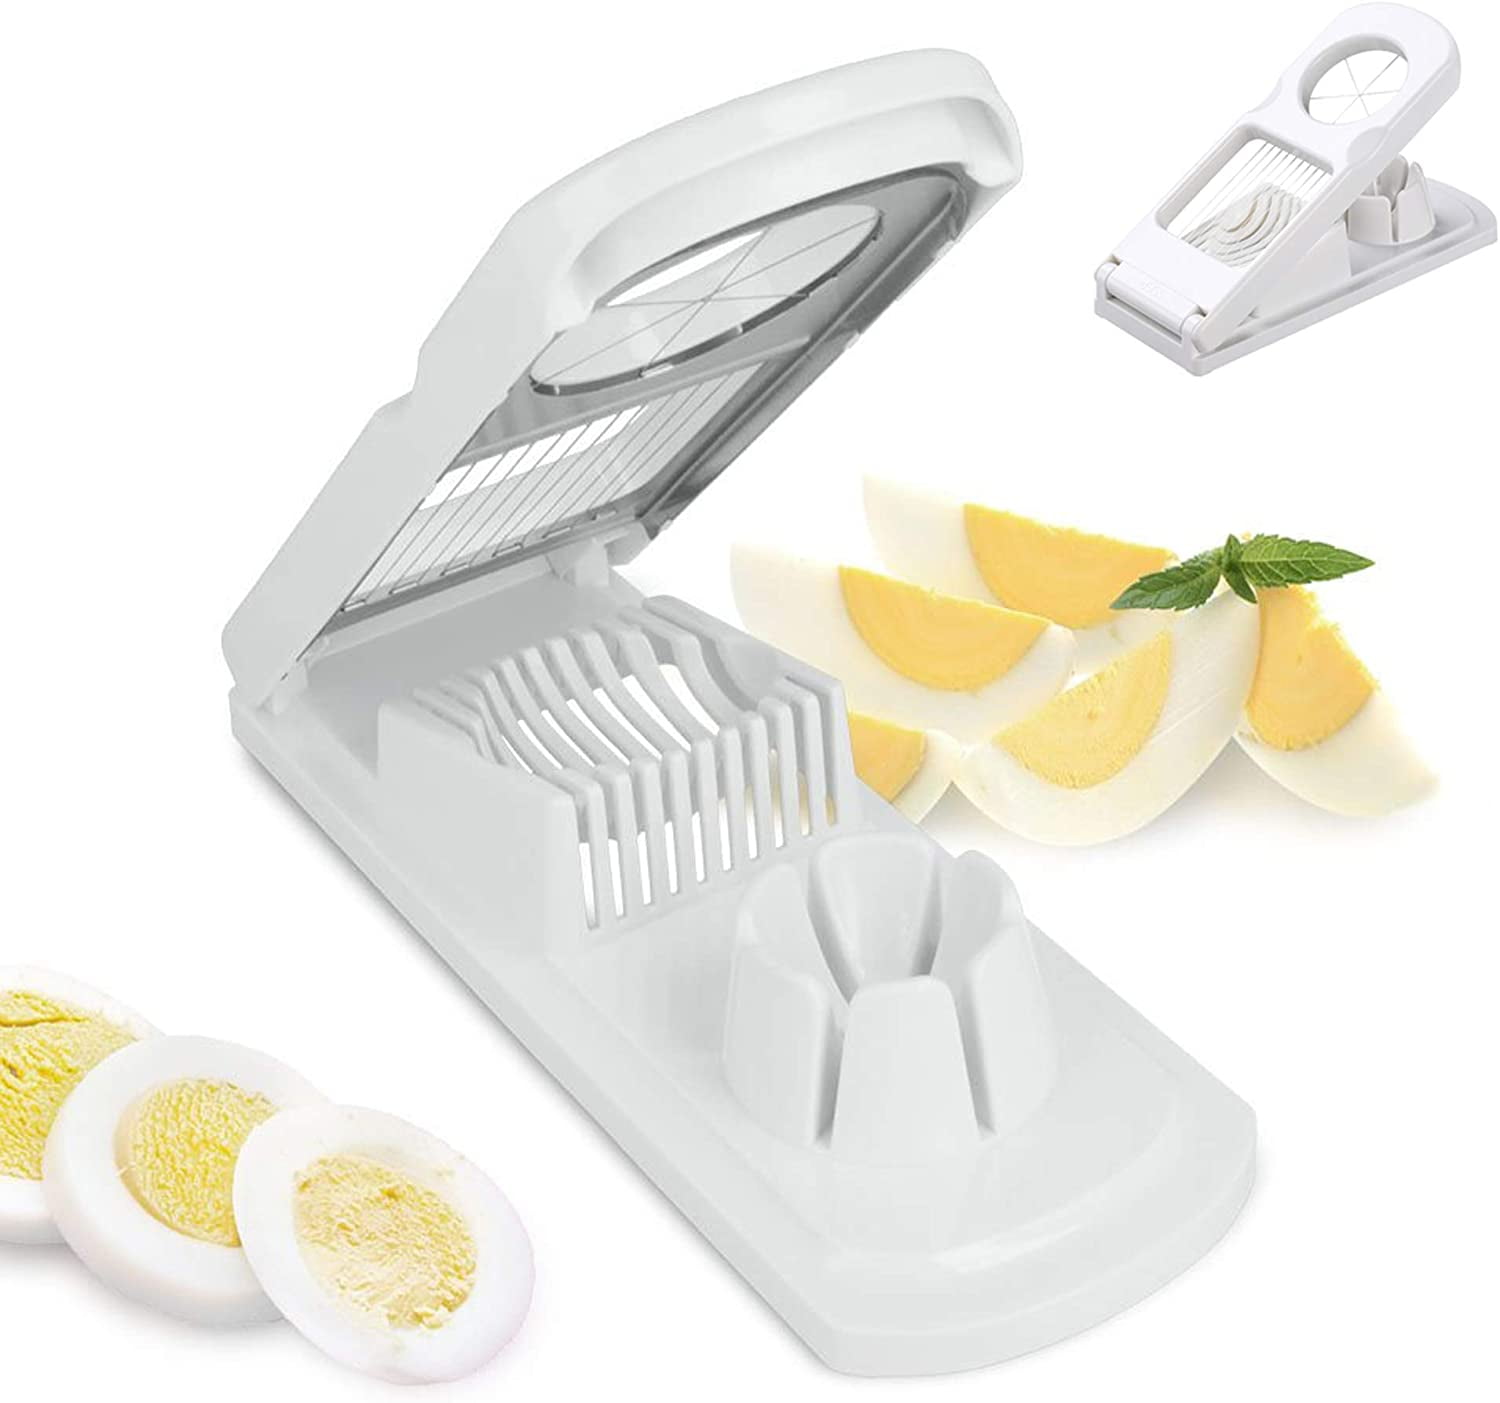 Boiled Eggs Mold Cutter Slicer for Bento Box kitchen tools 2 pcs FreeShip 